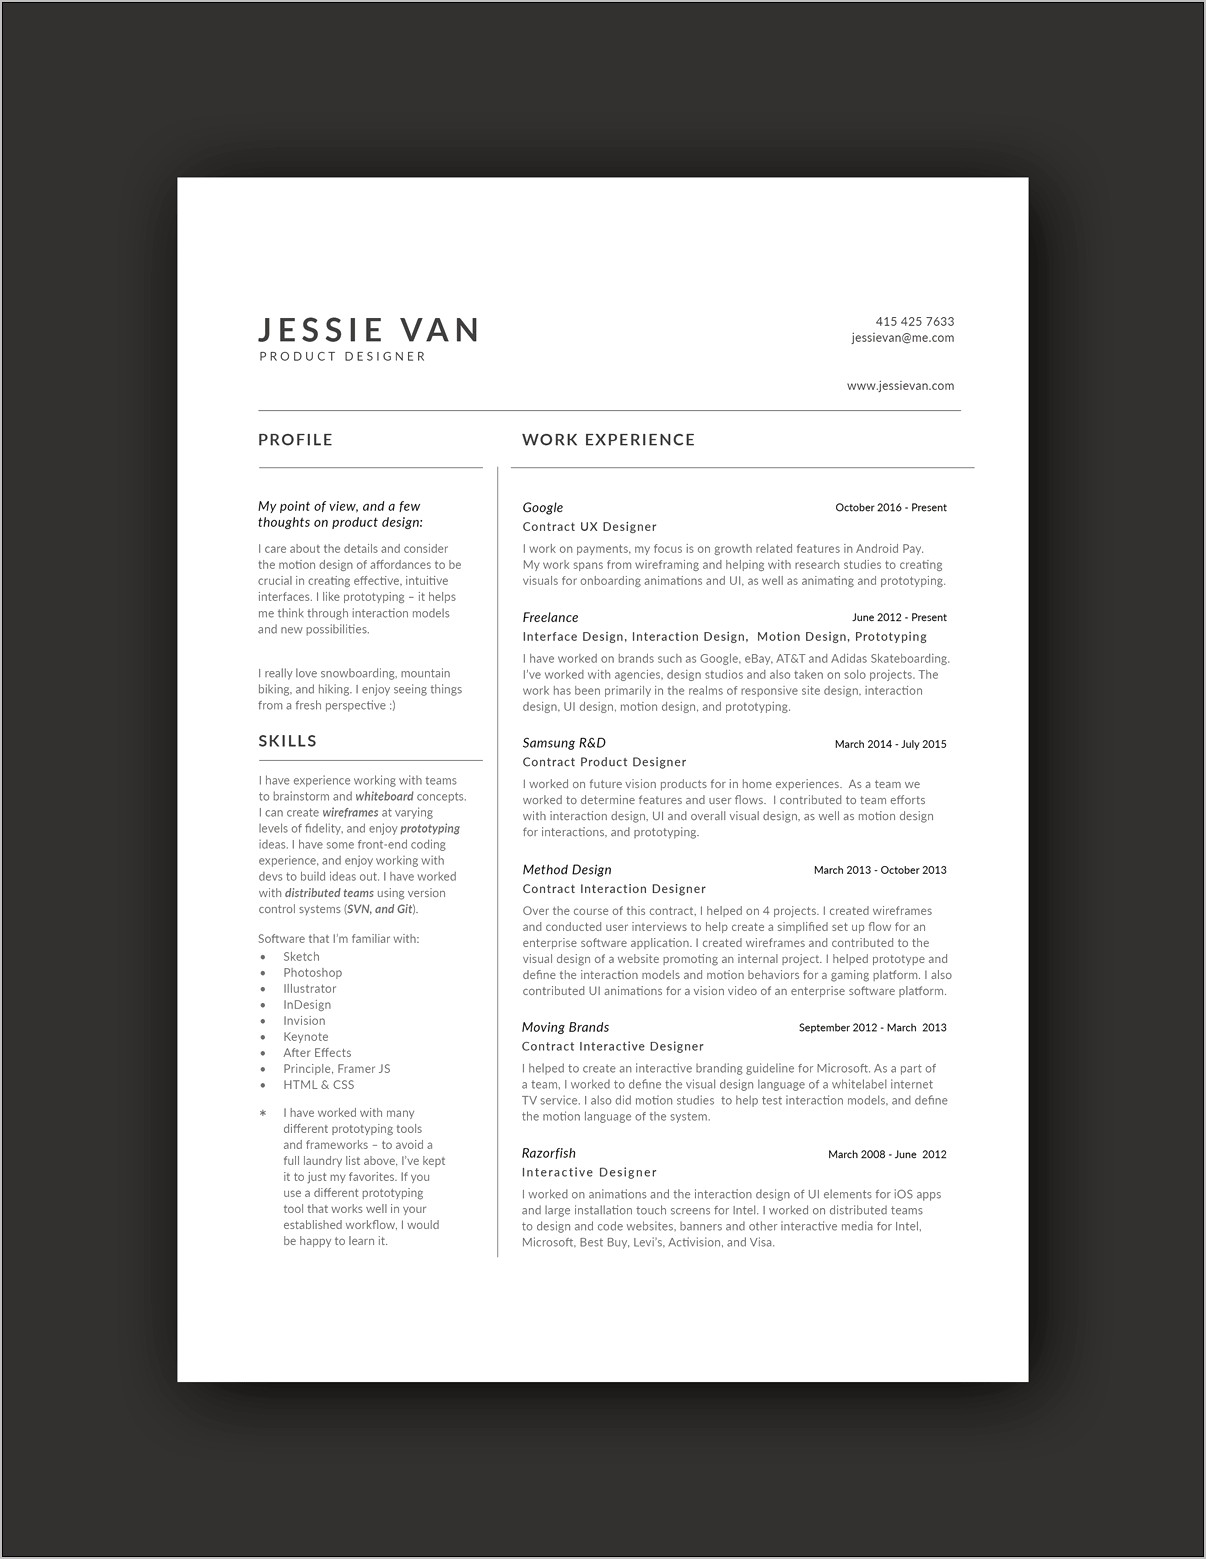 Resume Objectives For Creative Jobs